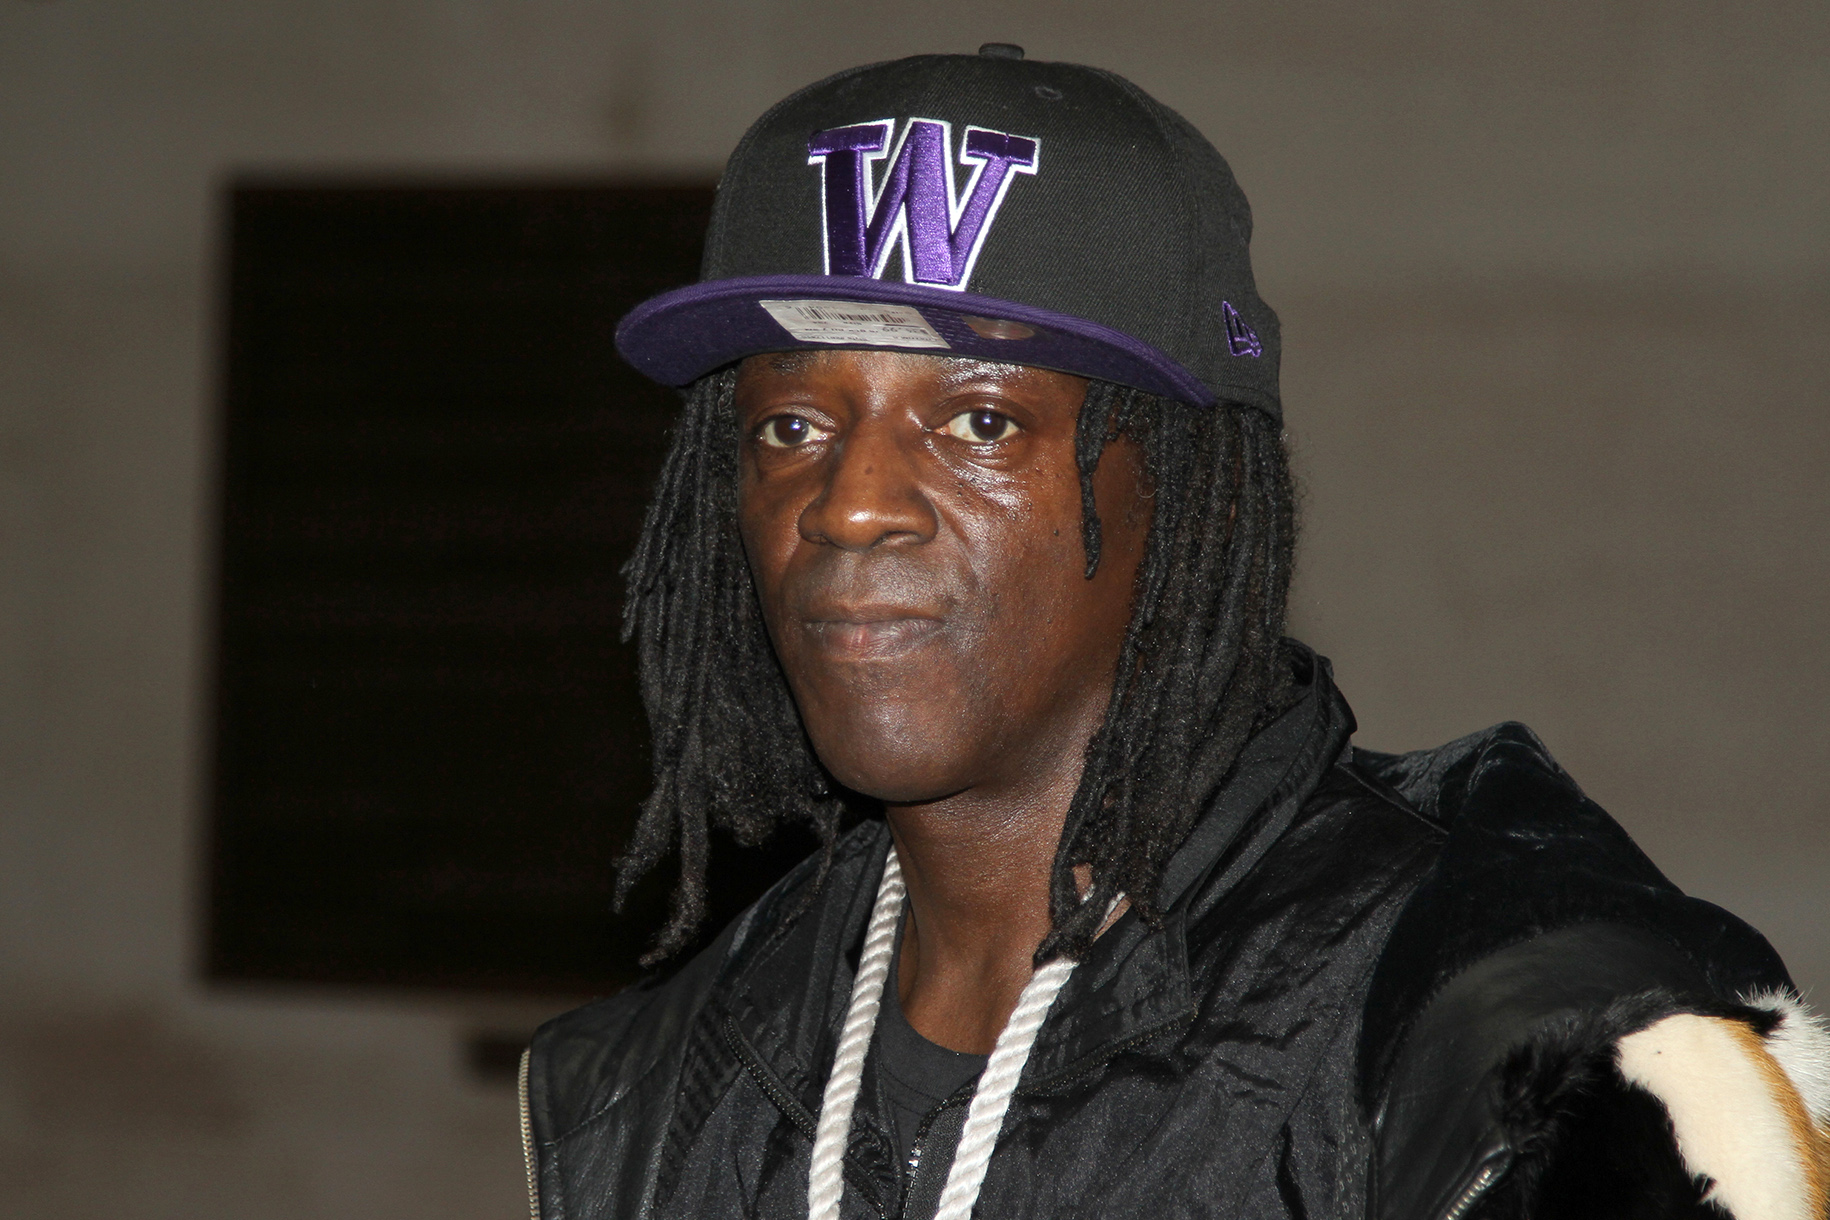 Flavor Flav Arrested on DUI and Possession Charges.